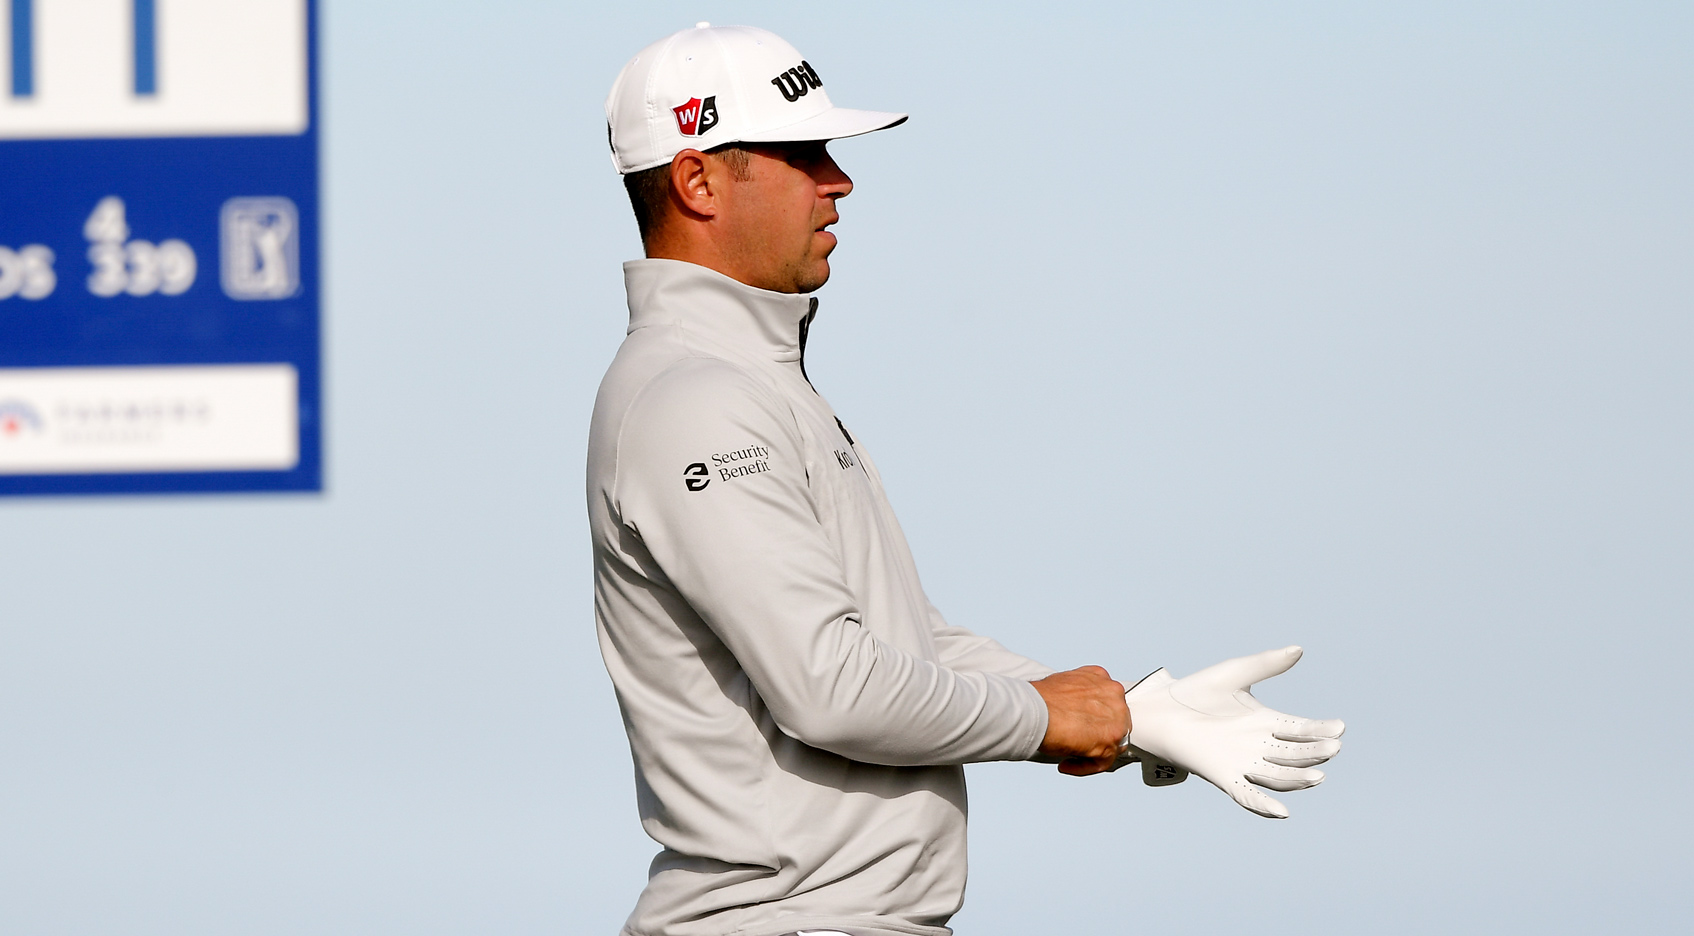 Gary Woodland climbing back from painful 2020